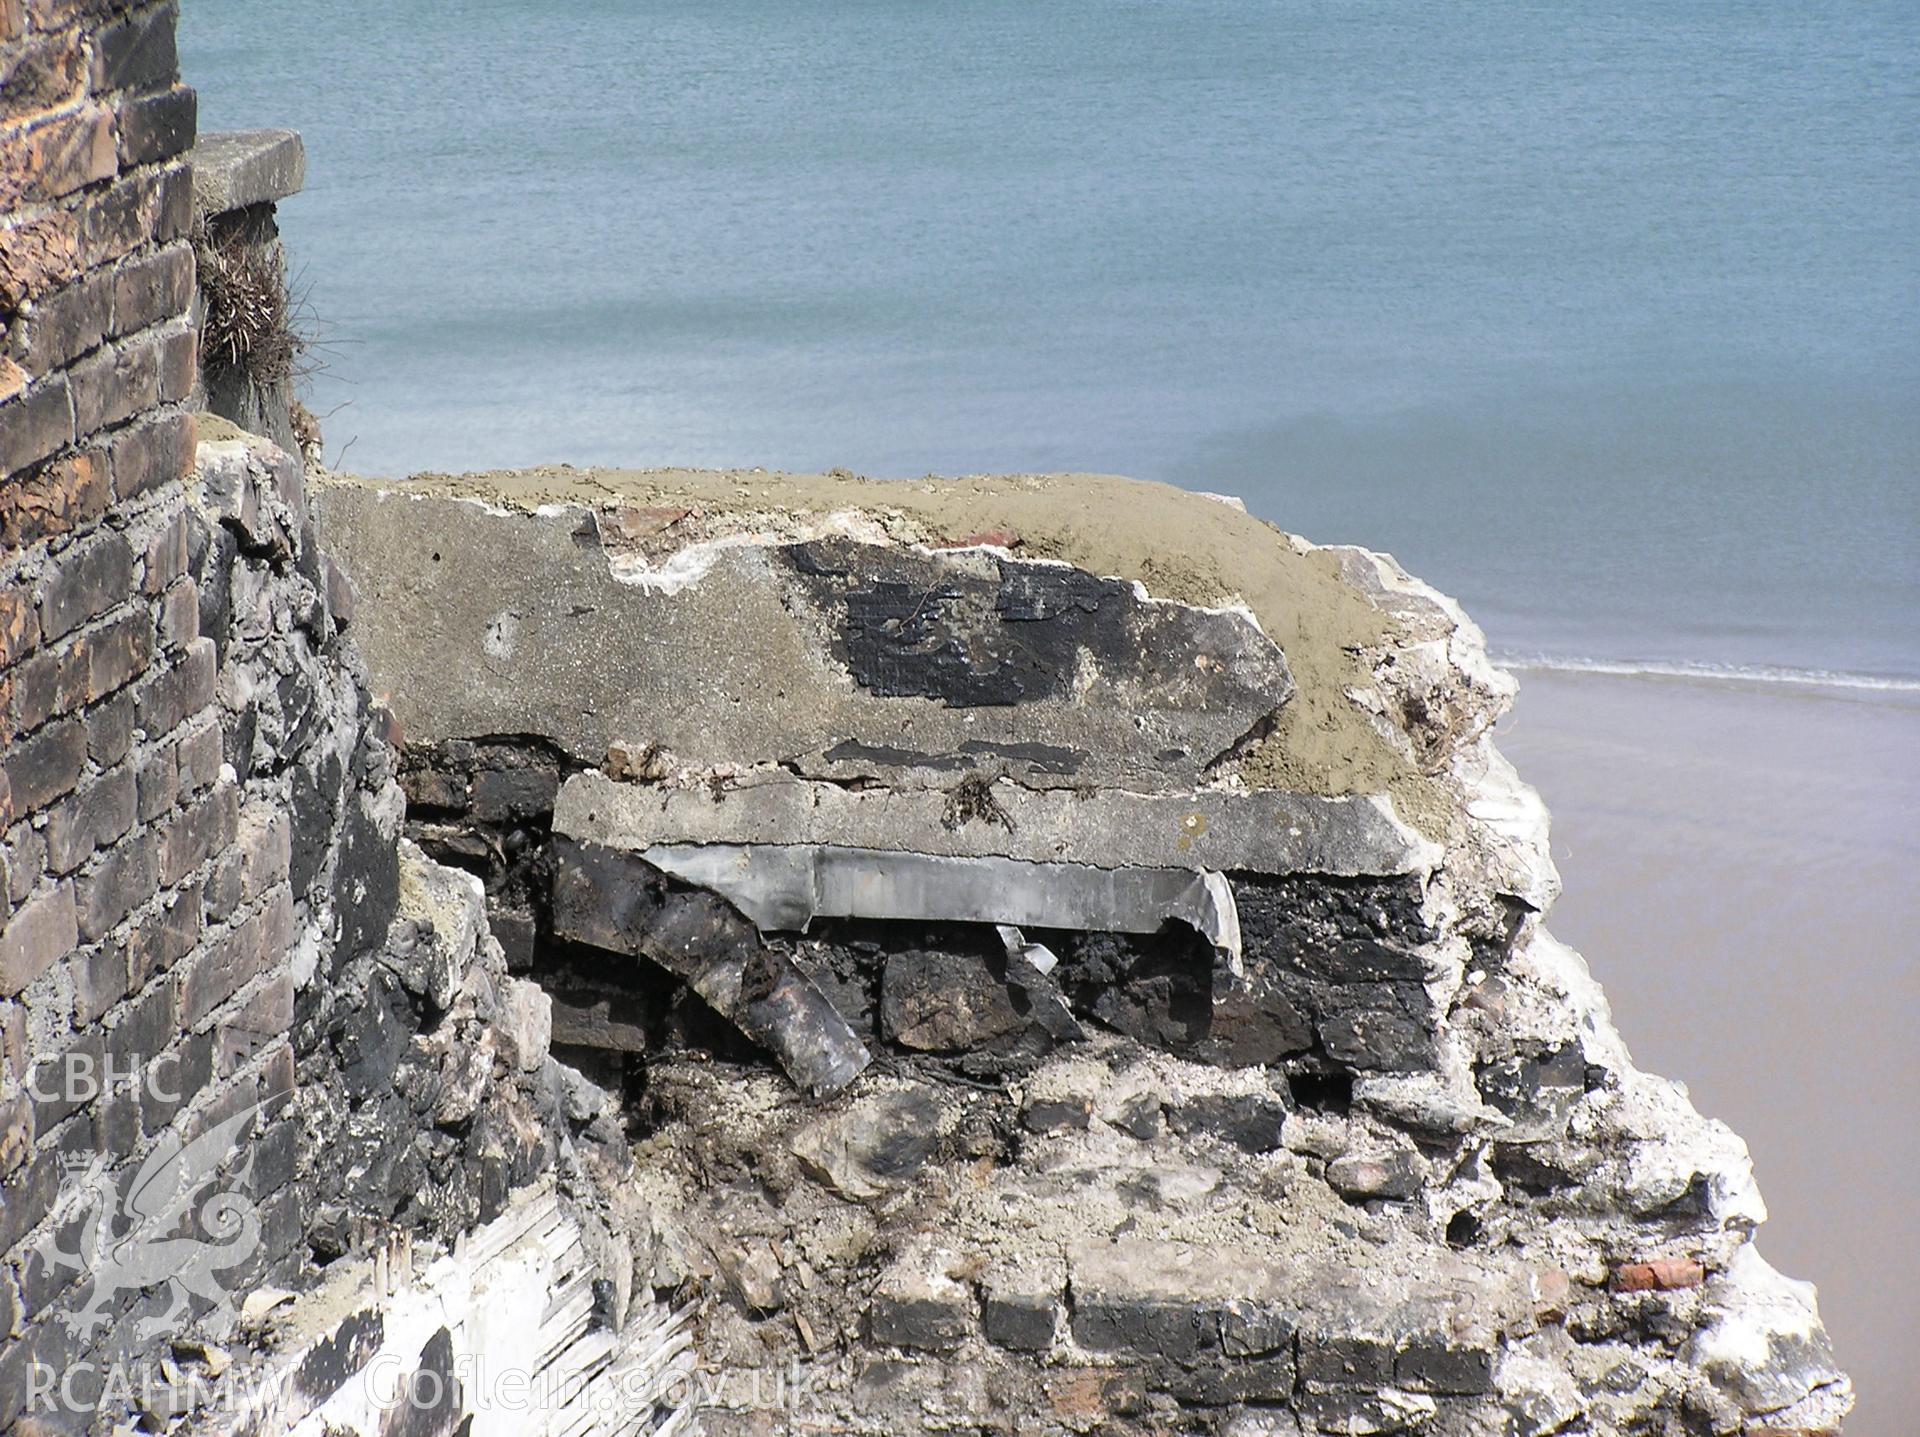 Colour digital photograph showing part of the wreckage of the Royal Gatehouse Hotel.